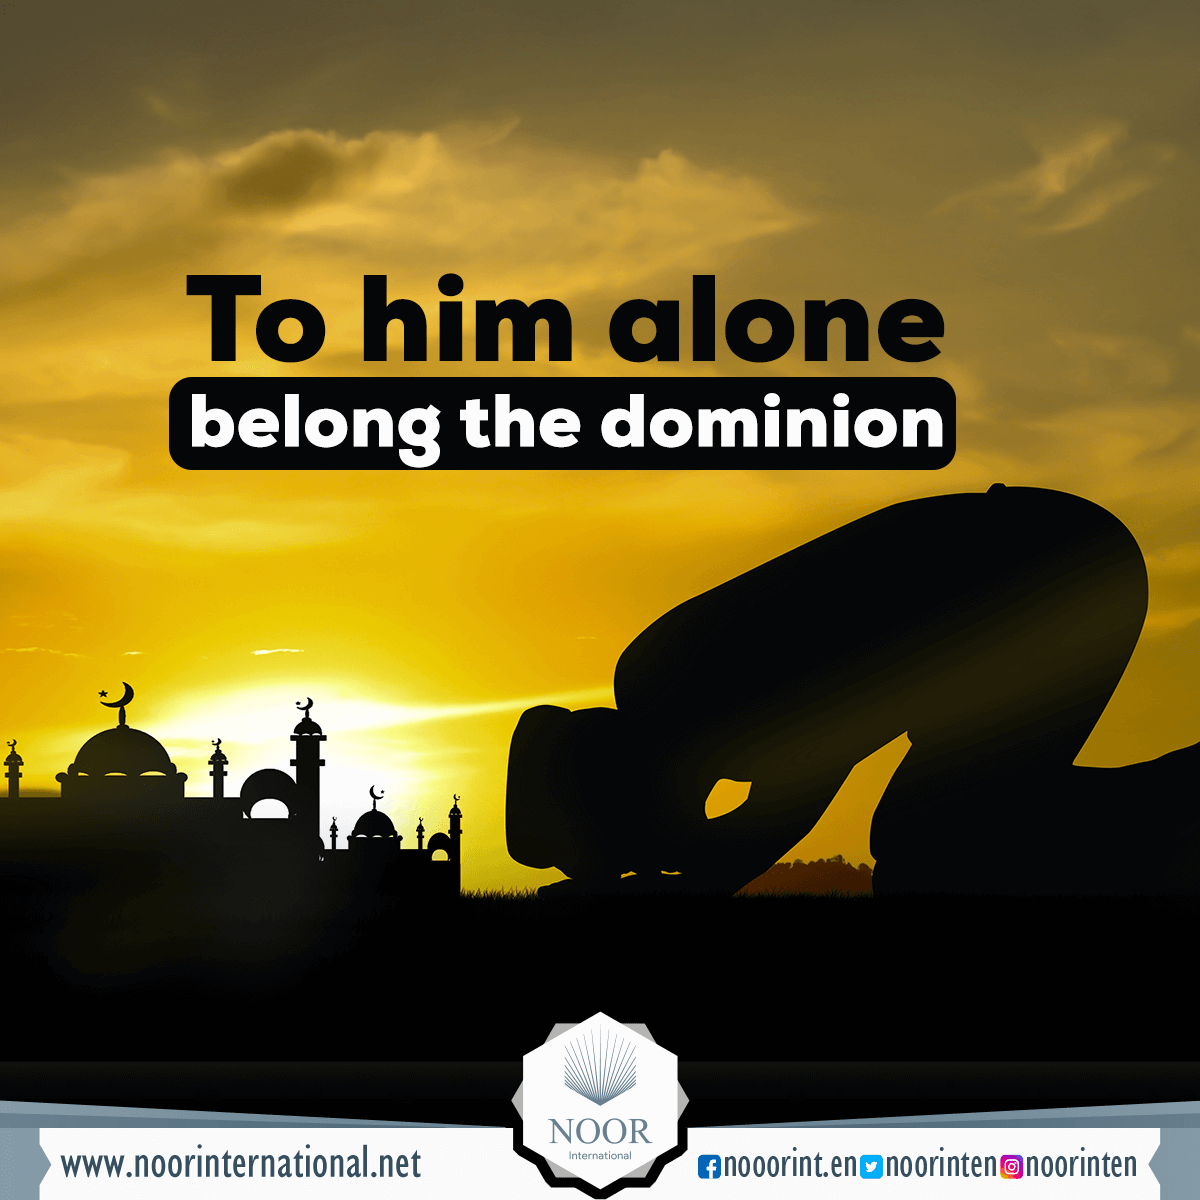 To him alone belong the dominion